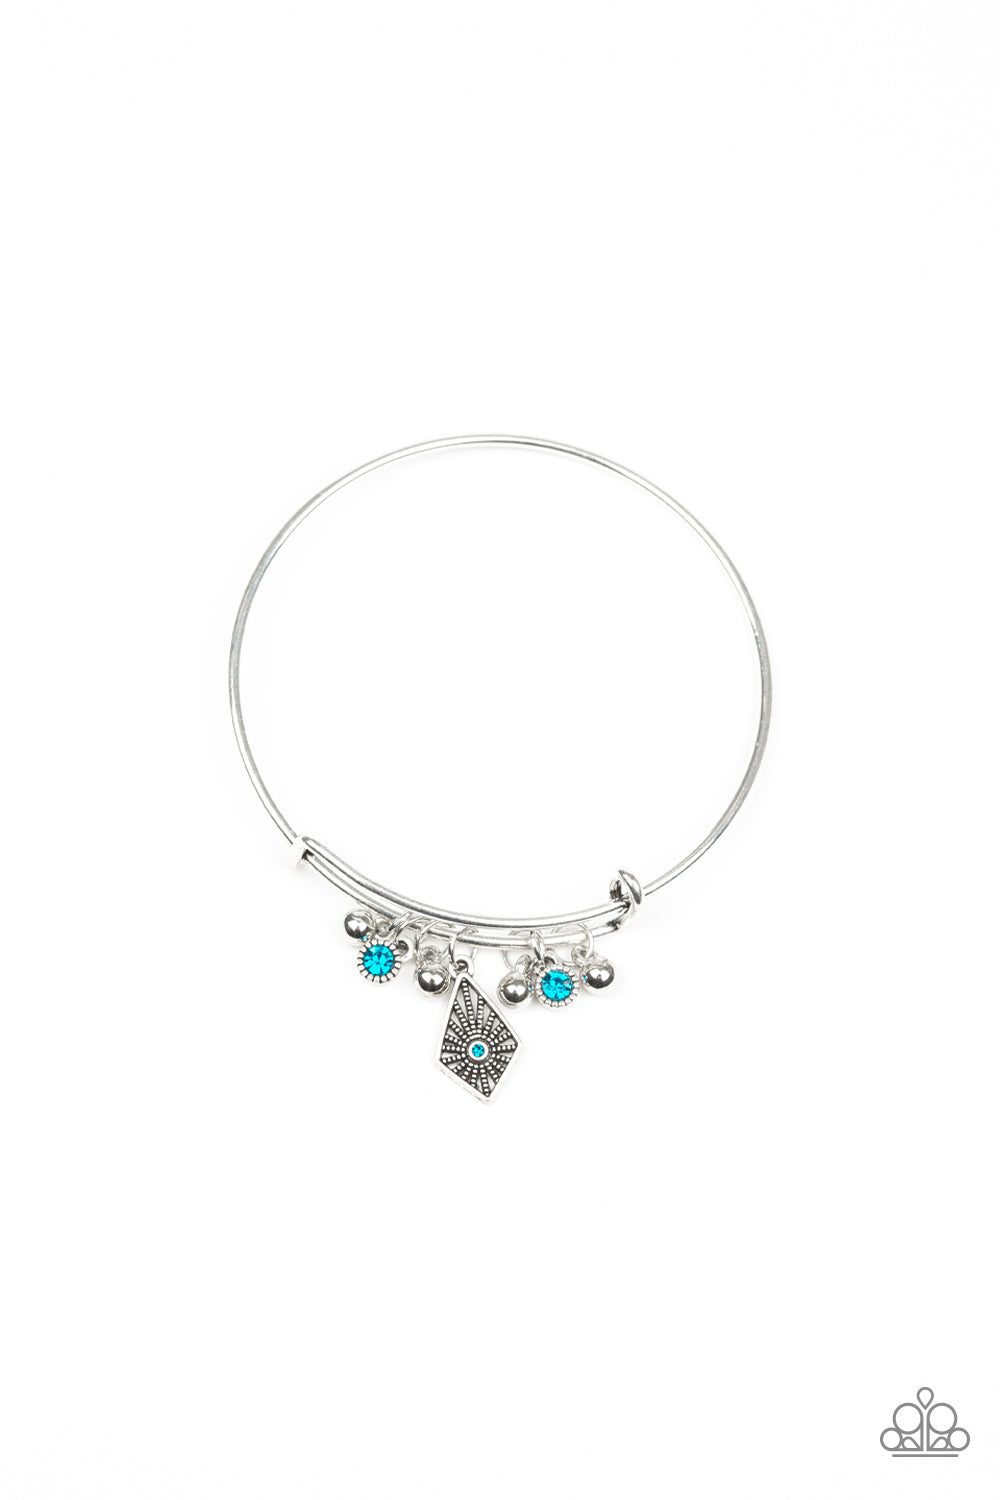 &lt;P&gt;A collection of shimmery silver beads and glittery blue rhinestone accents slide along a sleek bar fitting, creating whimsical charms as they glide along the dainty silver bangle. &lt;/P&gt;

&lt;P&gt;&lt;I&gt; Sold as one individual bracelet.&lt;/I&gt;&lt;/p&gt;


&lt;img src=\&quot;https://d9b54x484lq62.cloudfront.net/paparazzi/shopping/images/517_tag150x115_1.png\&quot; alt=\&quot;New Kit\&quot; align=\&quot;middle\&quot; height=\&quot;50\&quot; width=\&quot;50\&quot;/&gt;